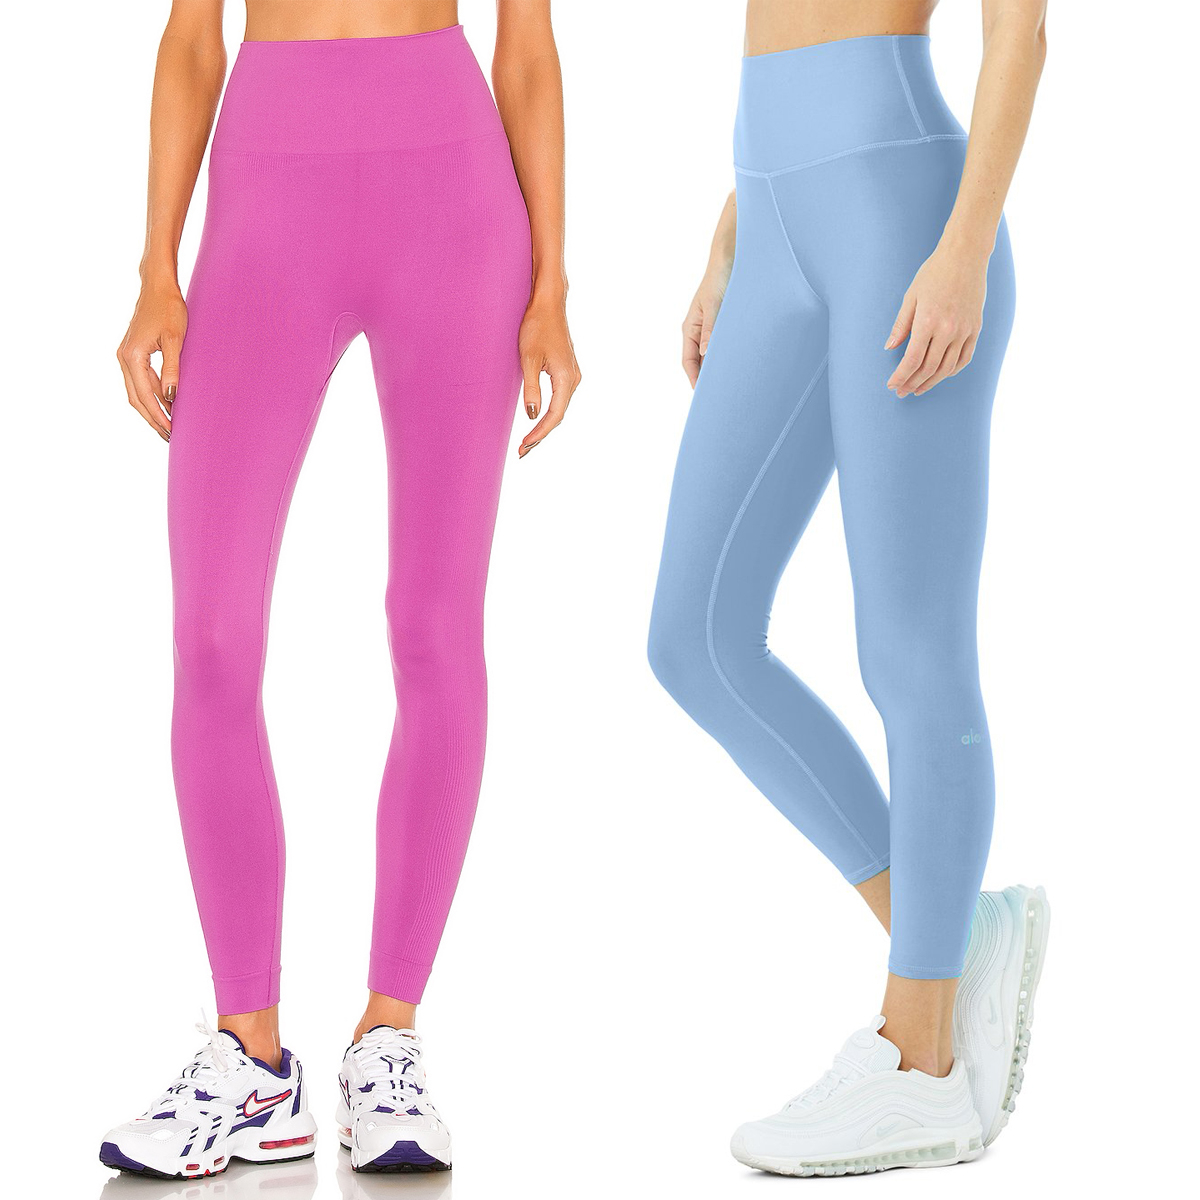 Airlift Headband  Cute outfits with leggings, Legging, Colorful leggings